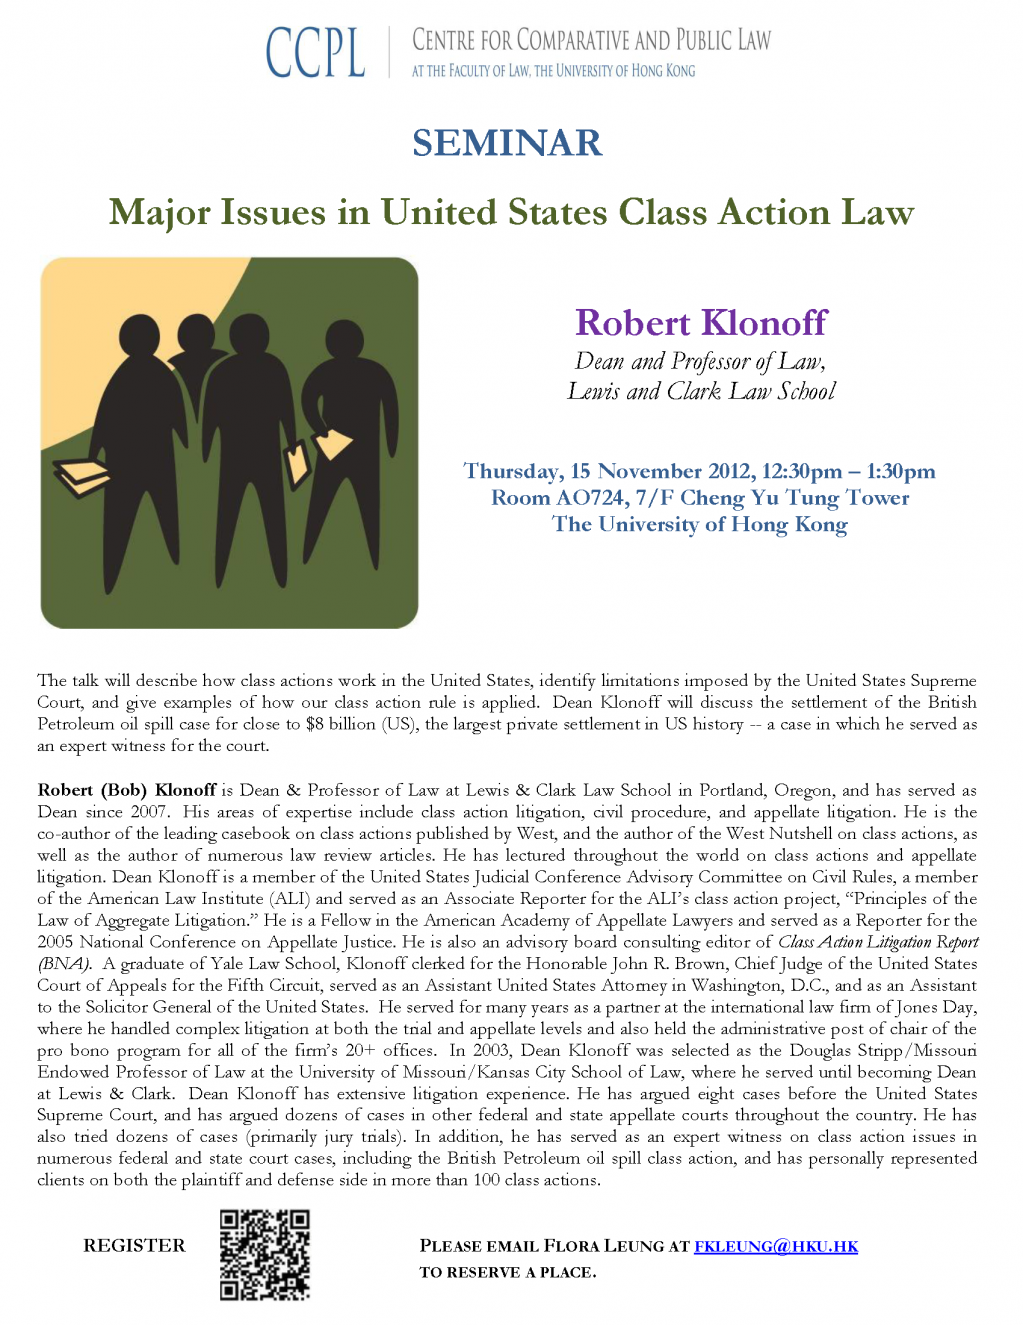 Major Issues in United States Class Action Law